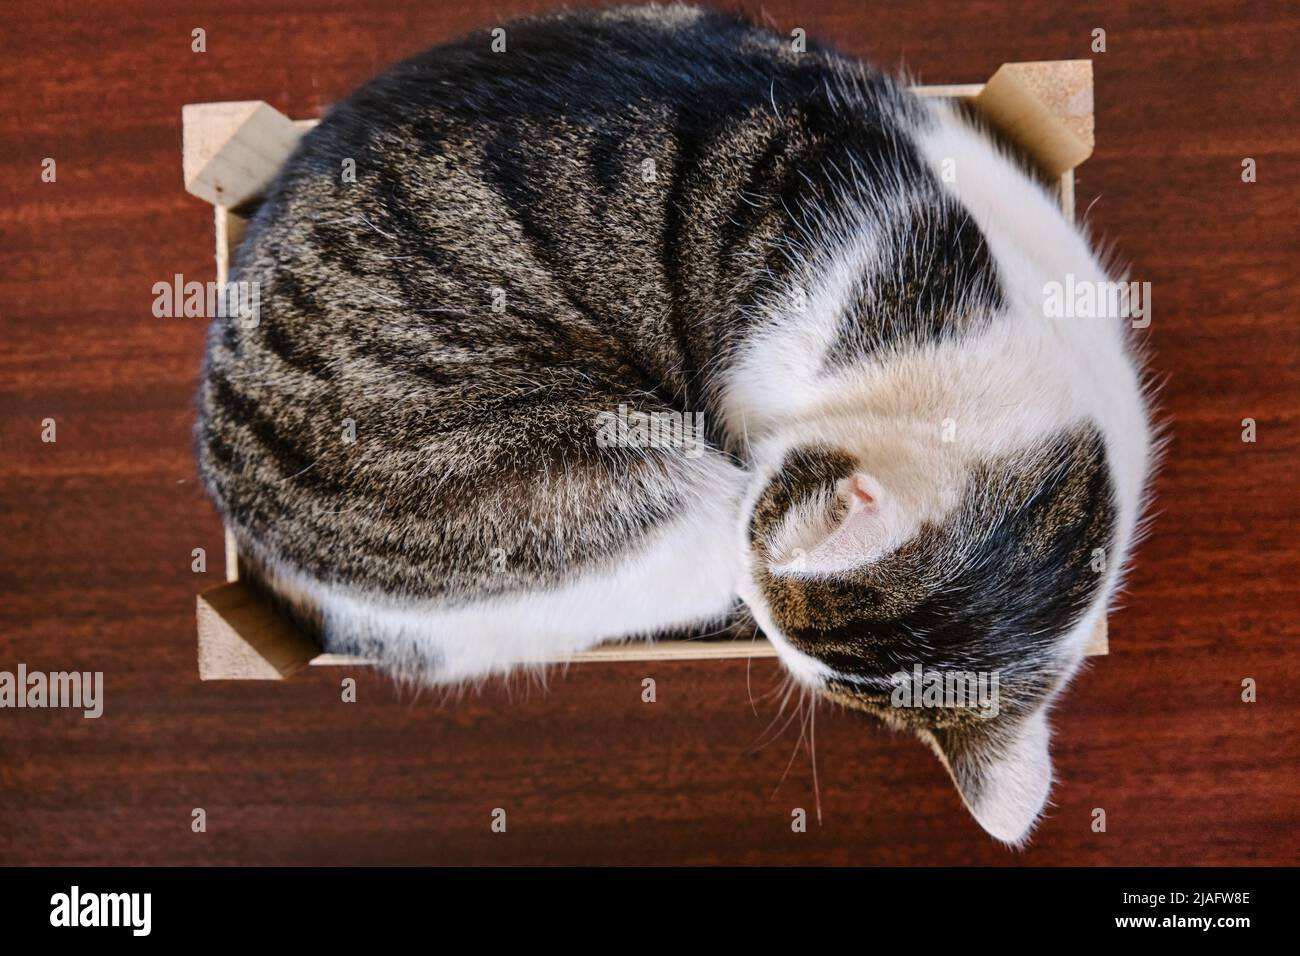 A domestic cat sleeos curled up in a wooden crate. Stock Photo